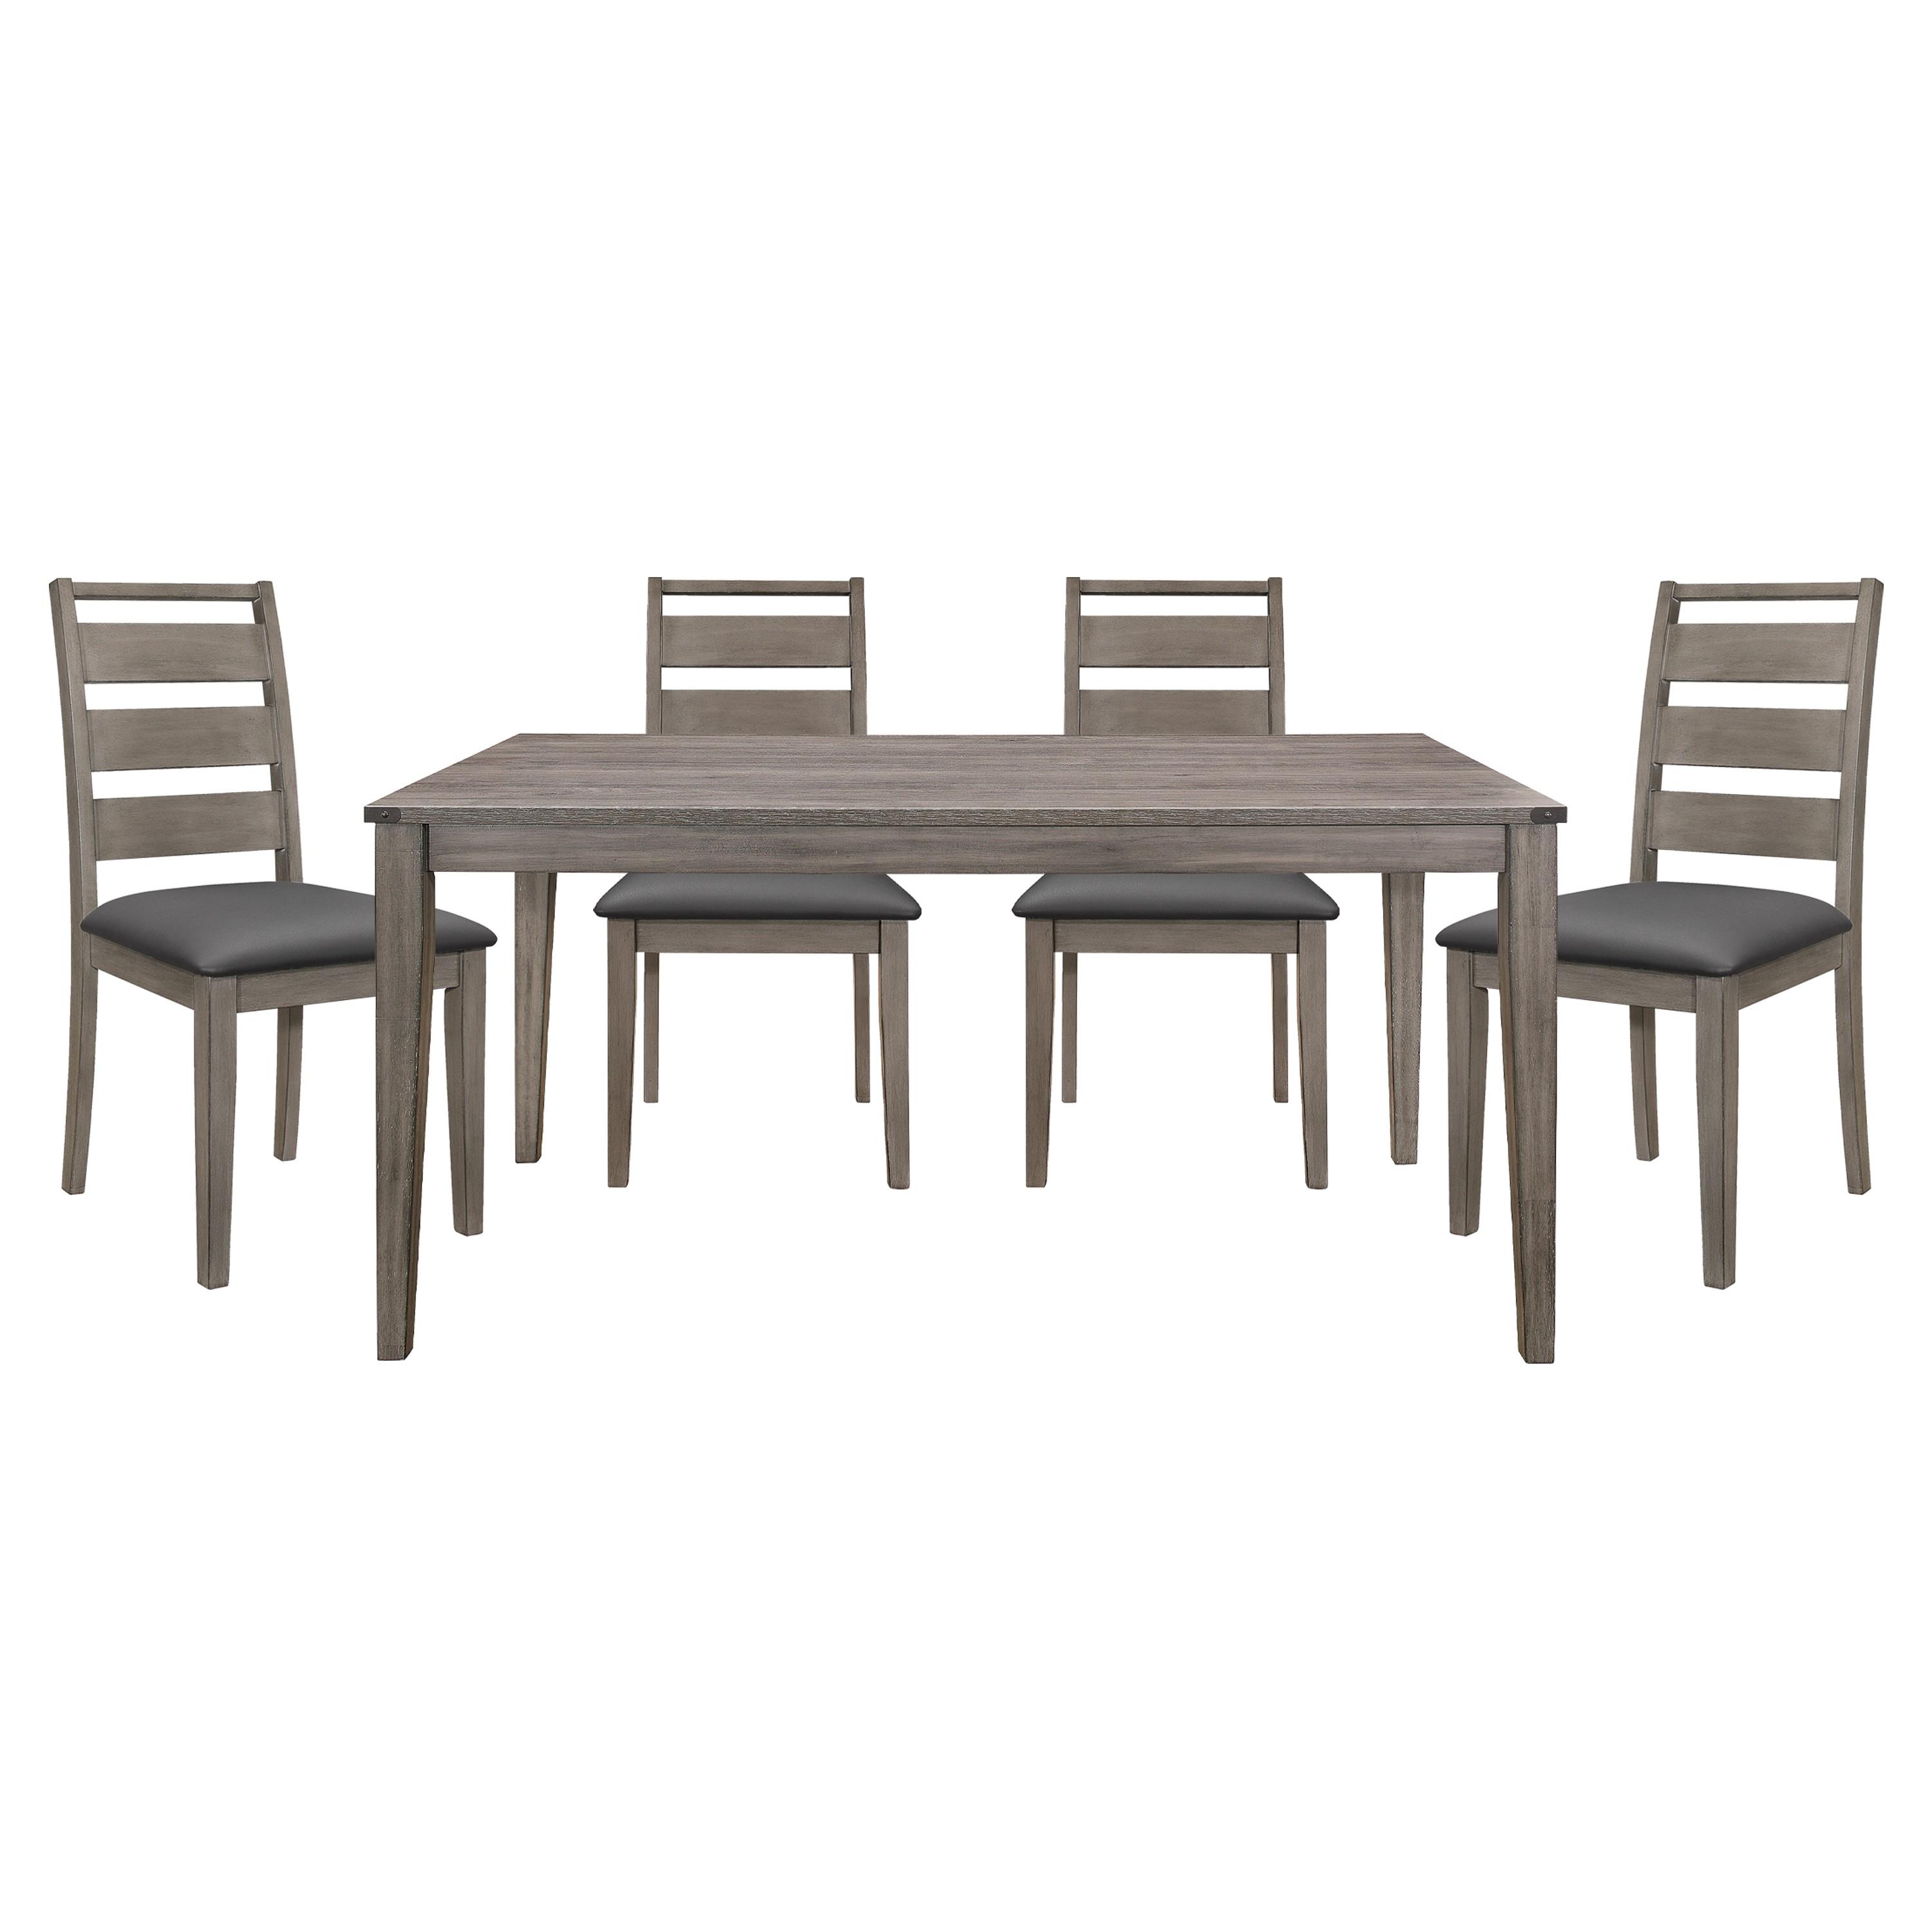 Modern Dining Room Set 2042-64*5PC Woodrow 2042-64*5PC in Gray Faux Leather